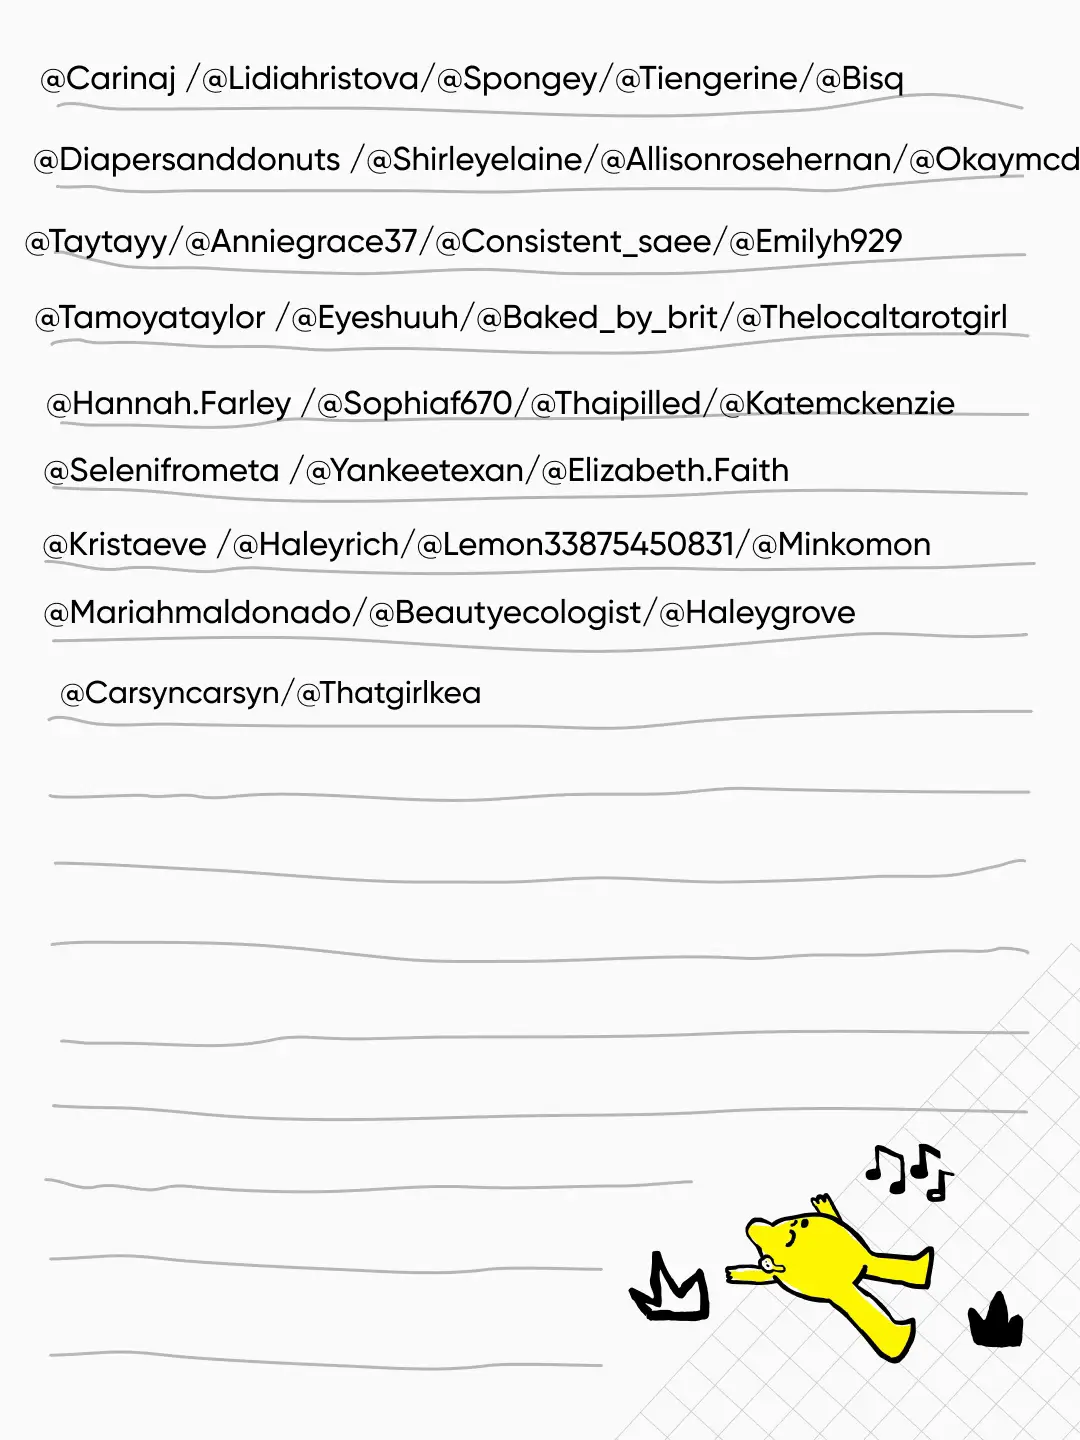  A list of people with their corresponding hash tags.